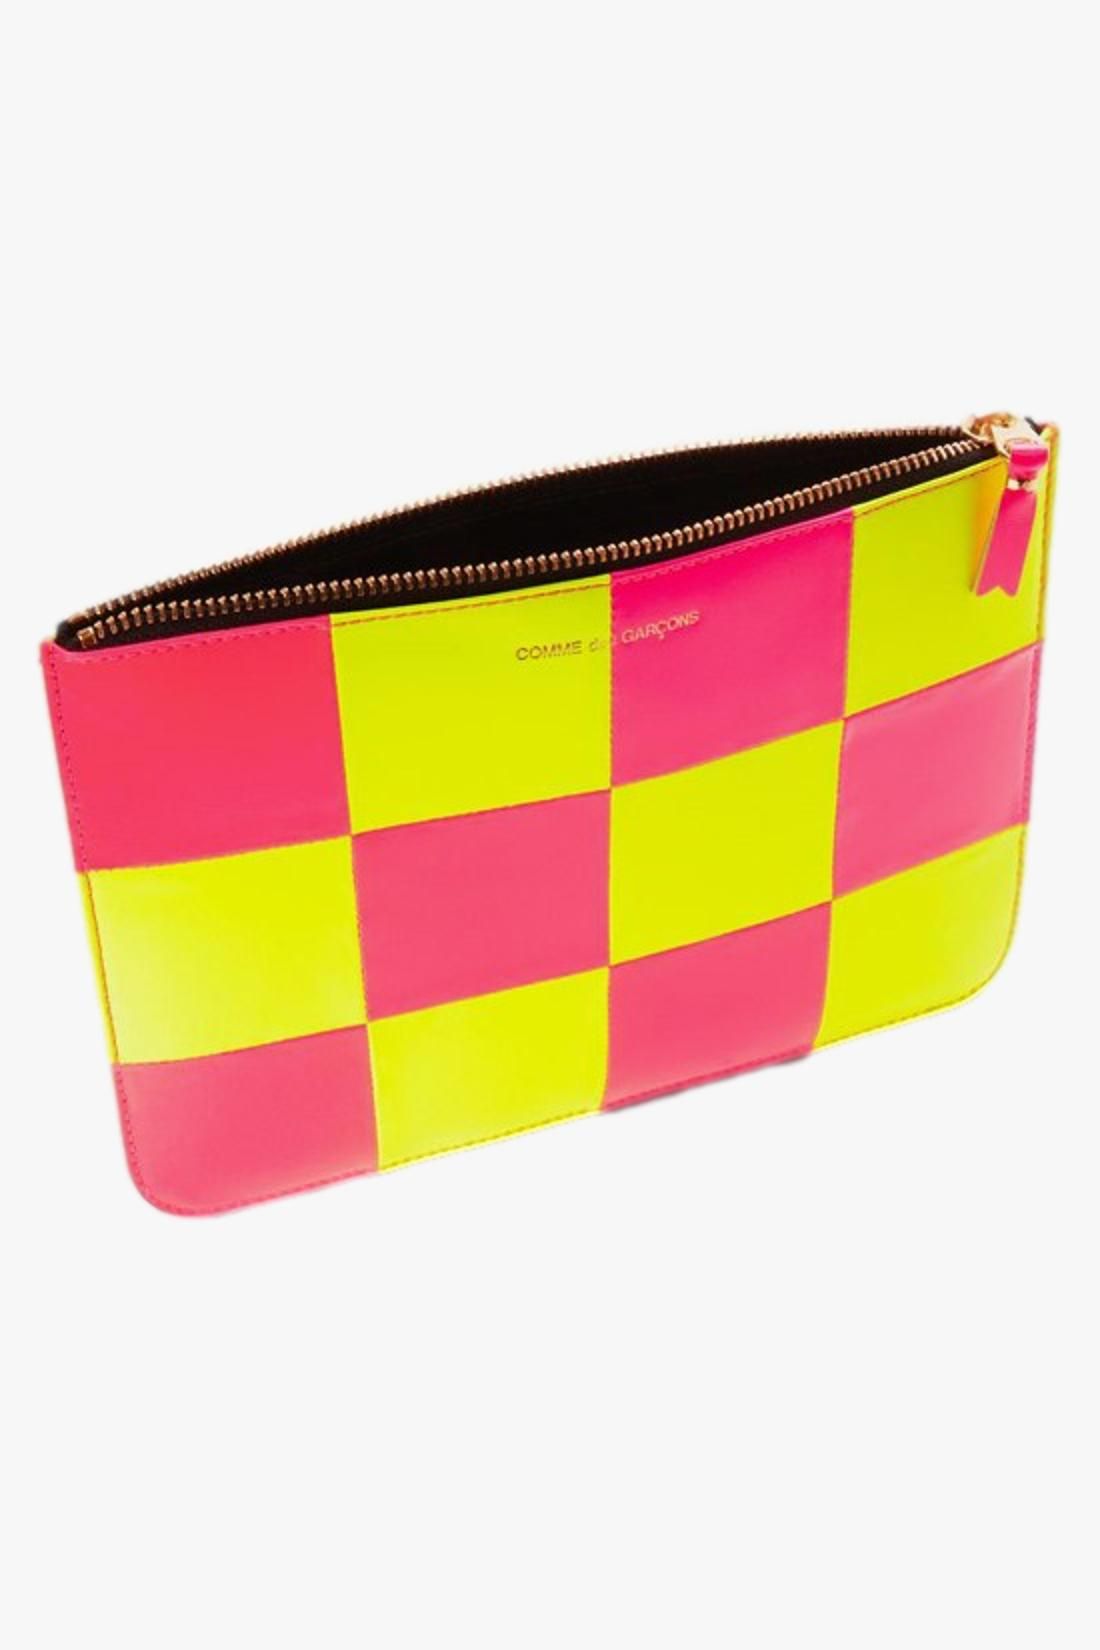 COMME DES GARÇONS WALLETS / Cdg wallet fluo squares Yellow pink